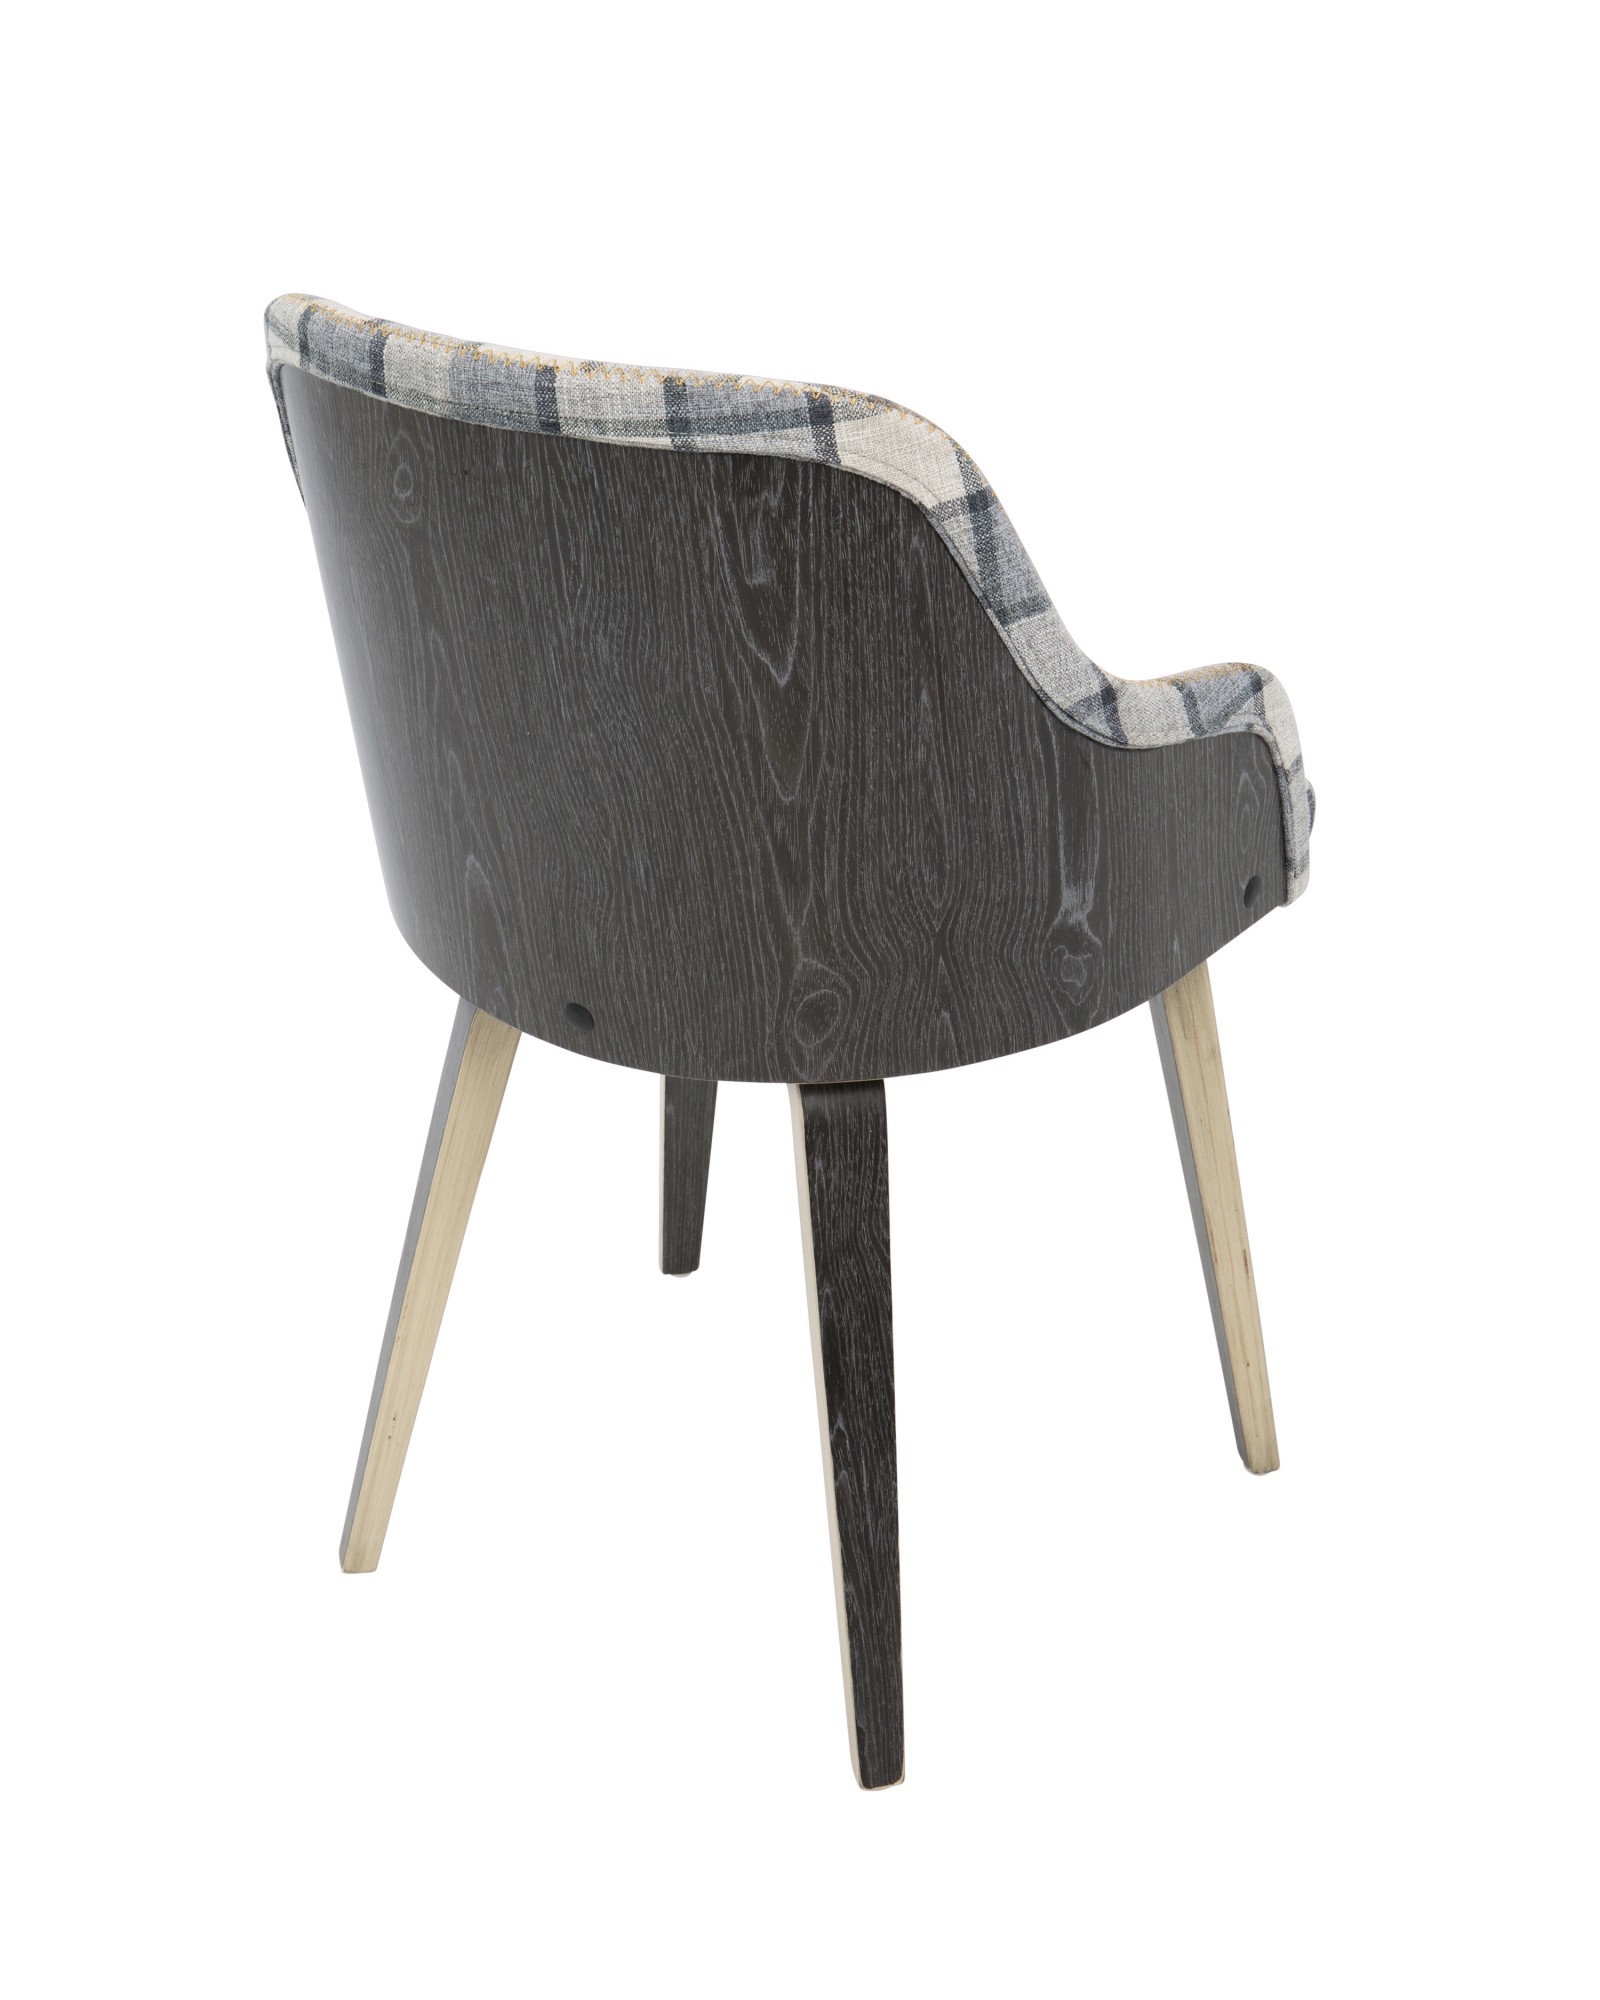 Bacci Mid-Century Modern Dining/ Accent Chair in Light Grey Wood and Grey Plaid